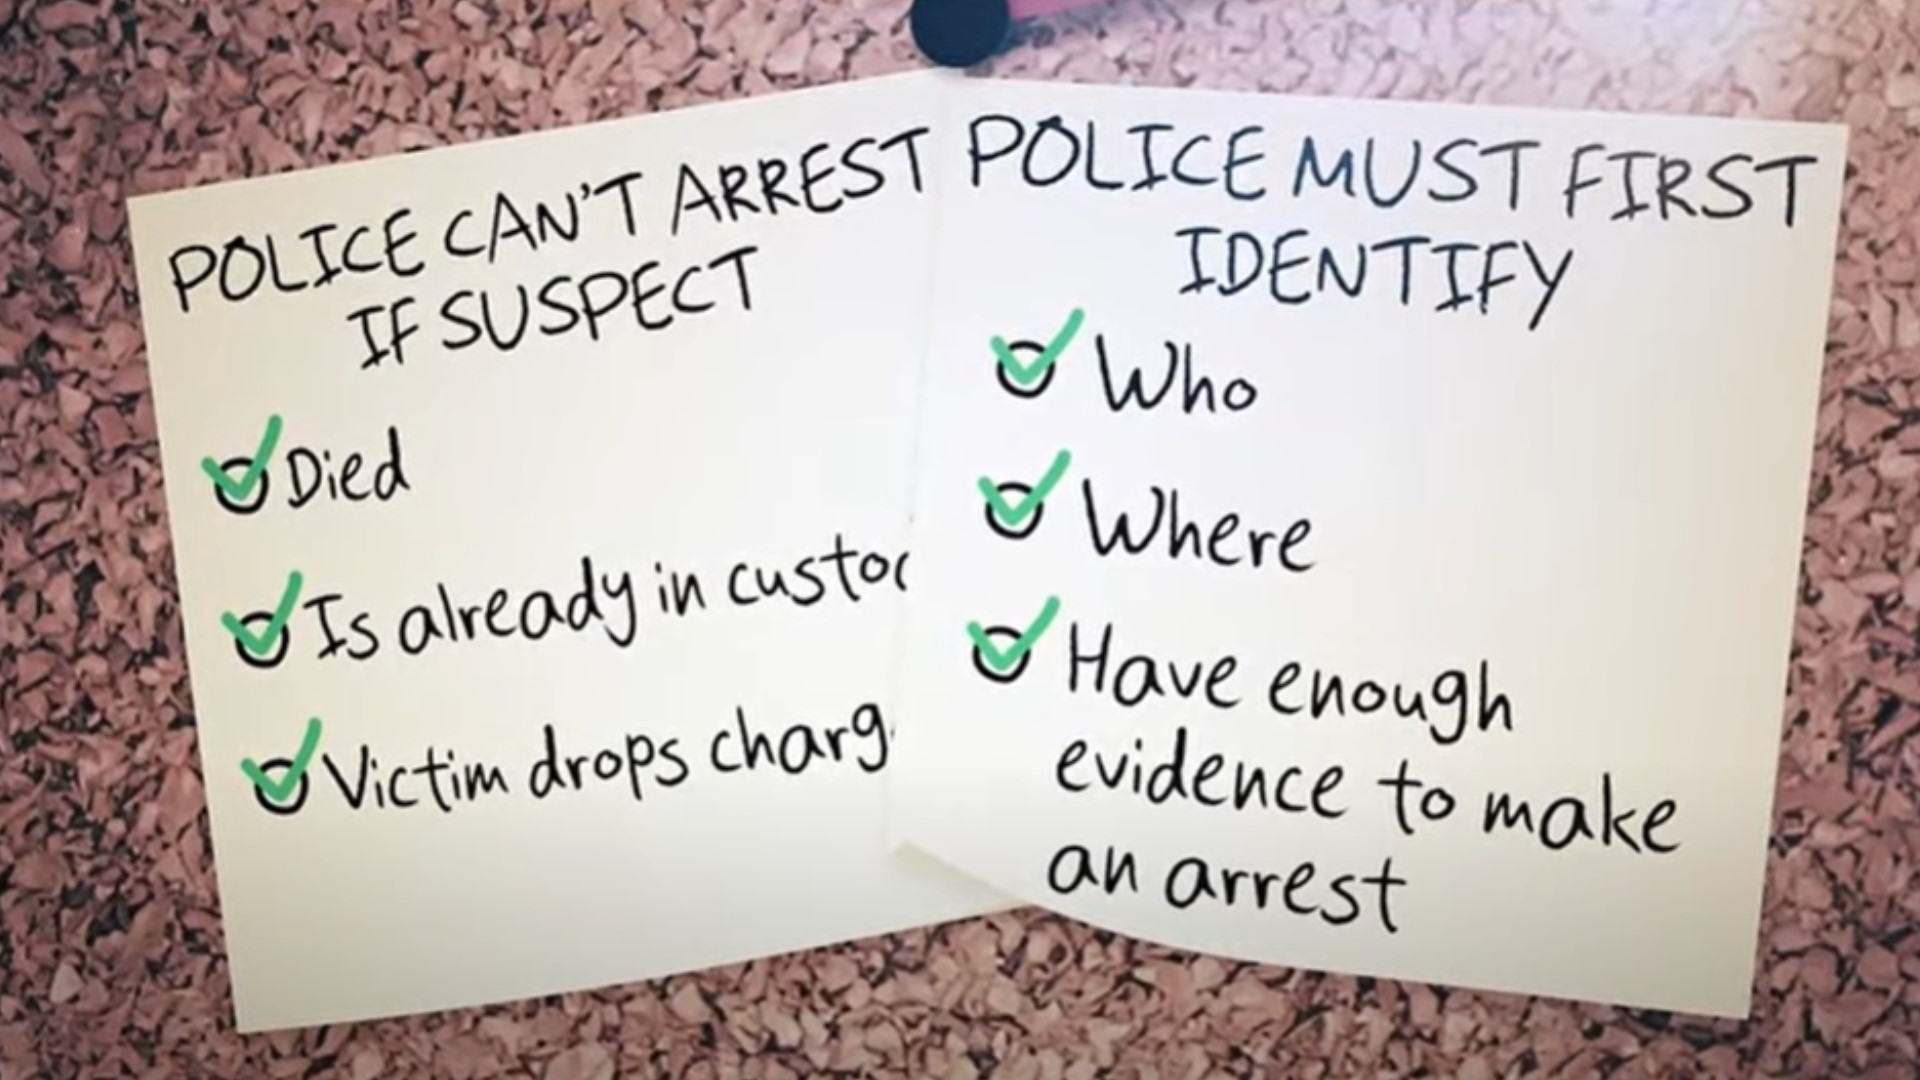 Police can mark a case exceptionally cleared when they can't arrest a suspect for reasons beyond their control. We explain what cases qualify.